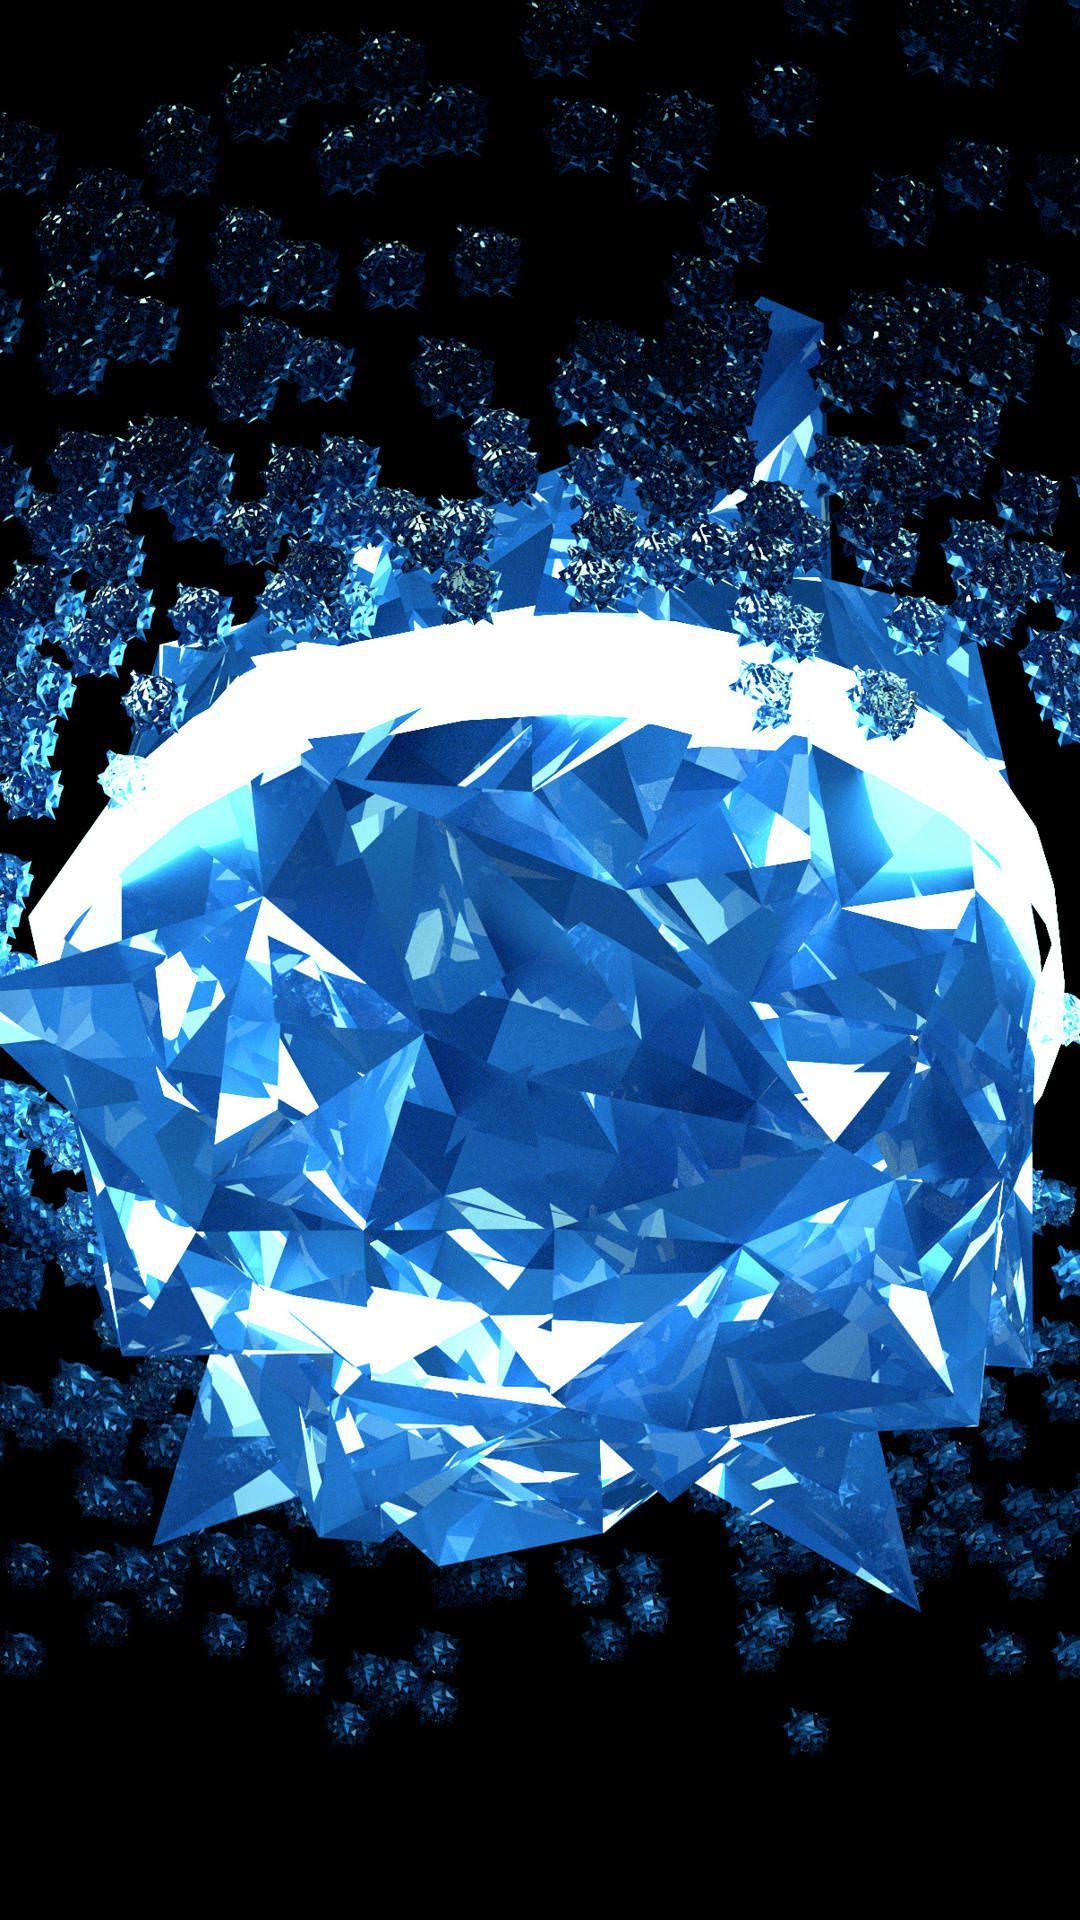 FREE Blue Crystal Wallpaper in PSD